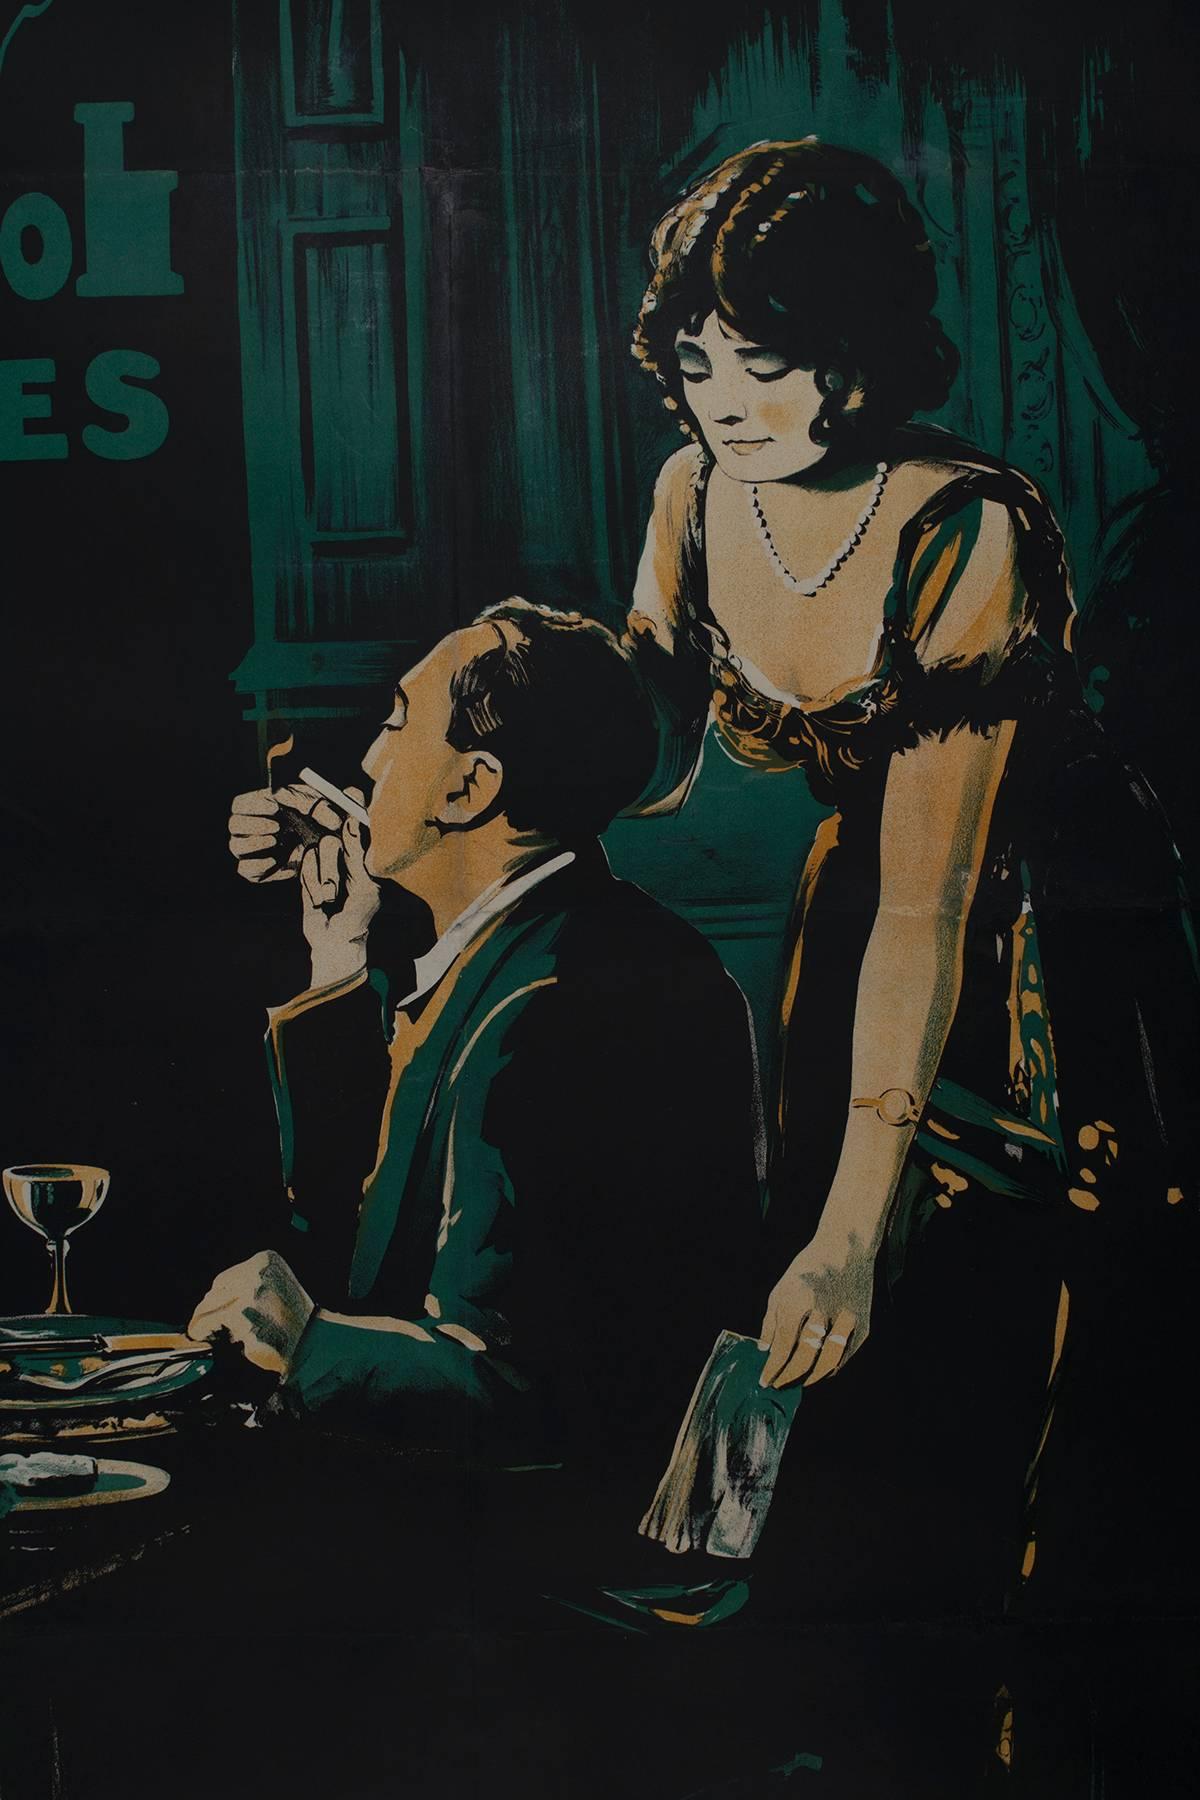 A large (two sheet) British movie poster by Dick Baker, 1921. This is an advertisement for "Delilah," directed by Fred Paul and based on the "Grand Guignol Series" written by C.E. Dering. Not much is known about the film;